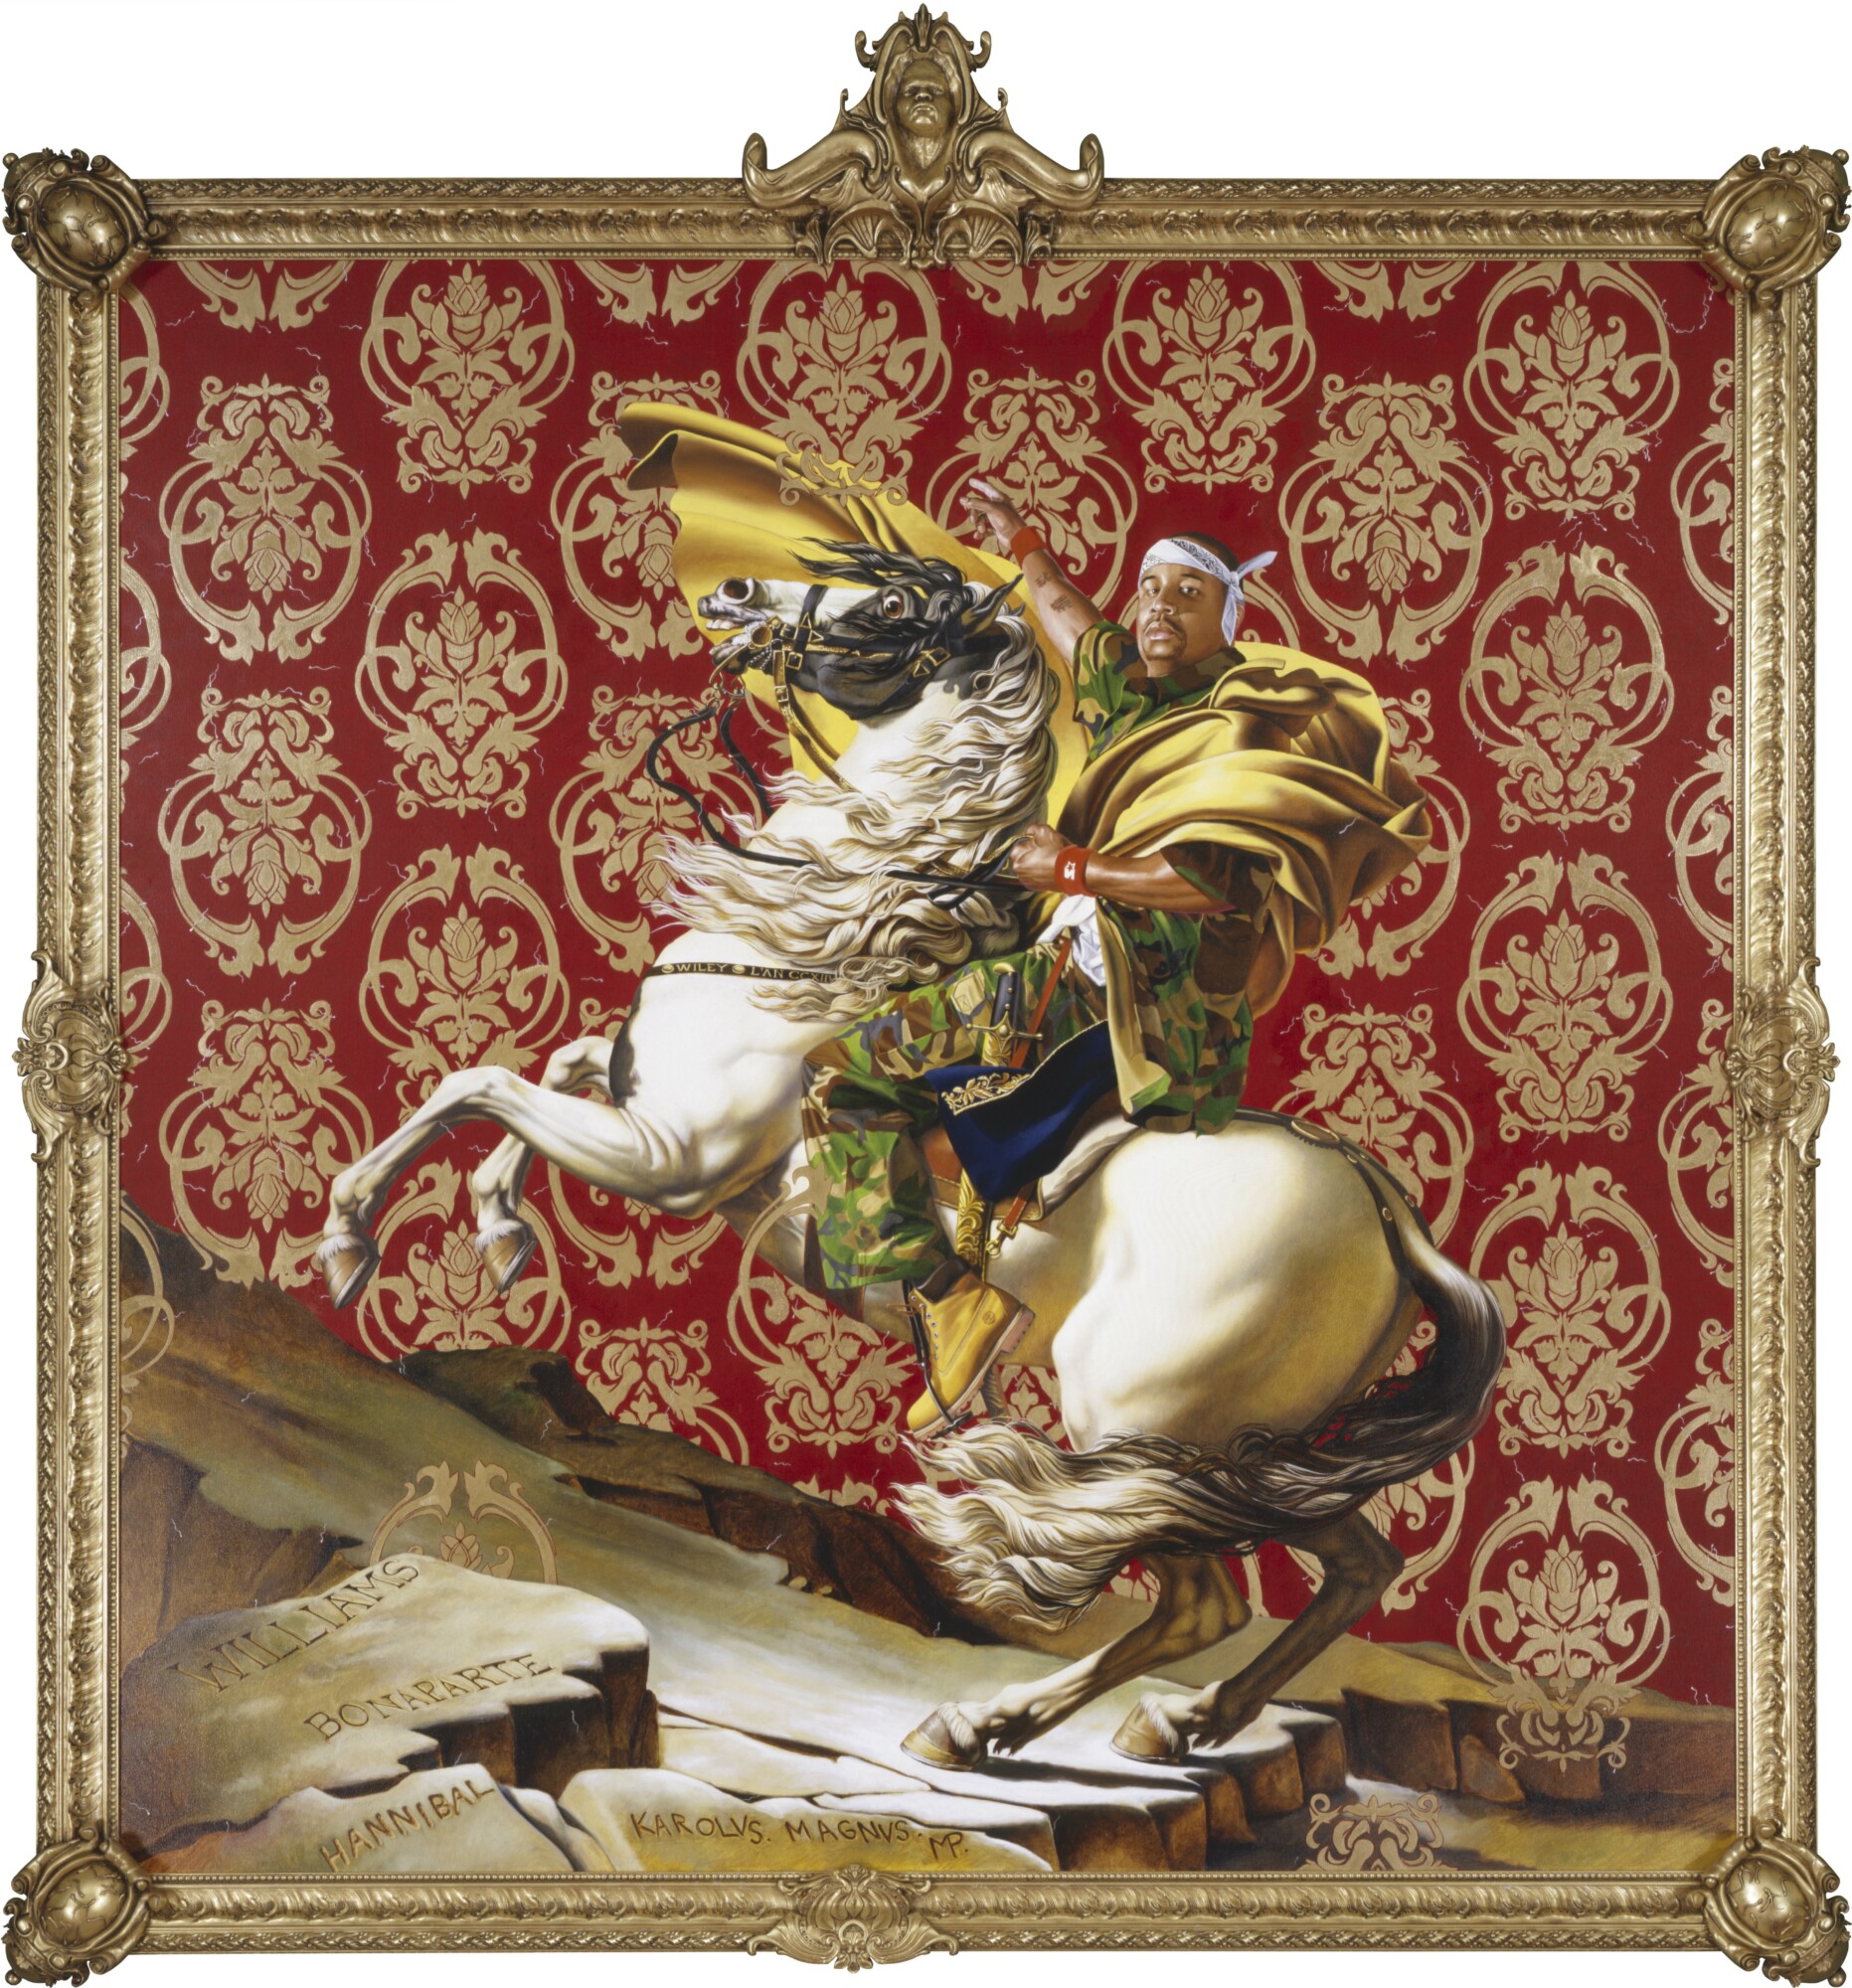 kehindewiley_Jacques-Louis_David_Meets_Kehinde_Wiley_Napoleon_Leading_the_Army_Over_the_Alps